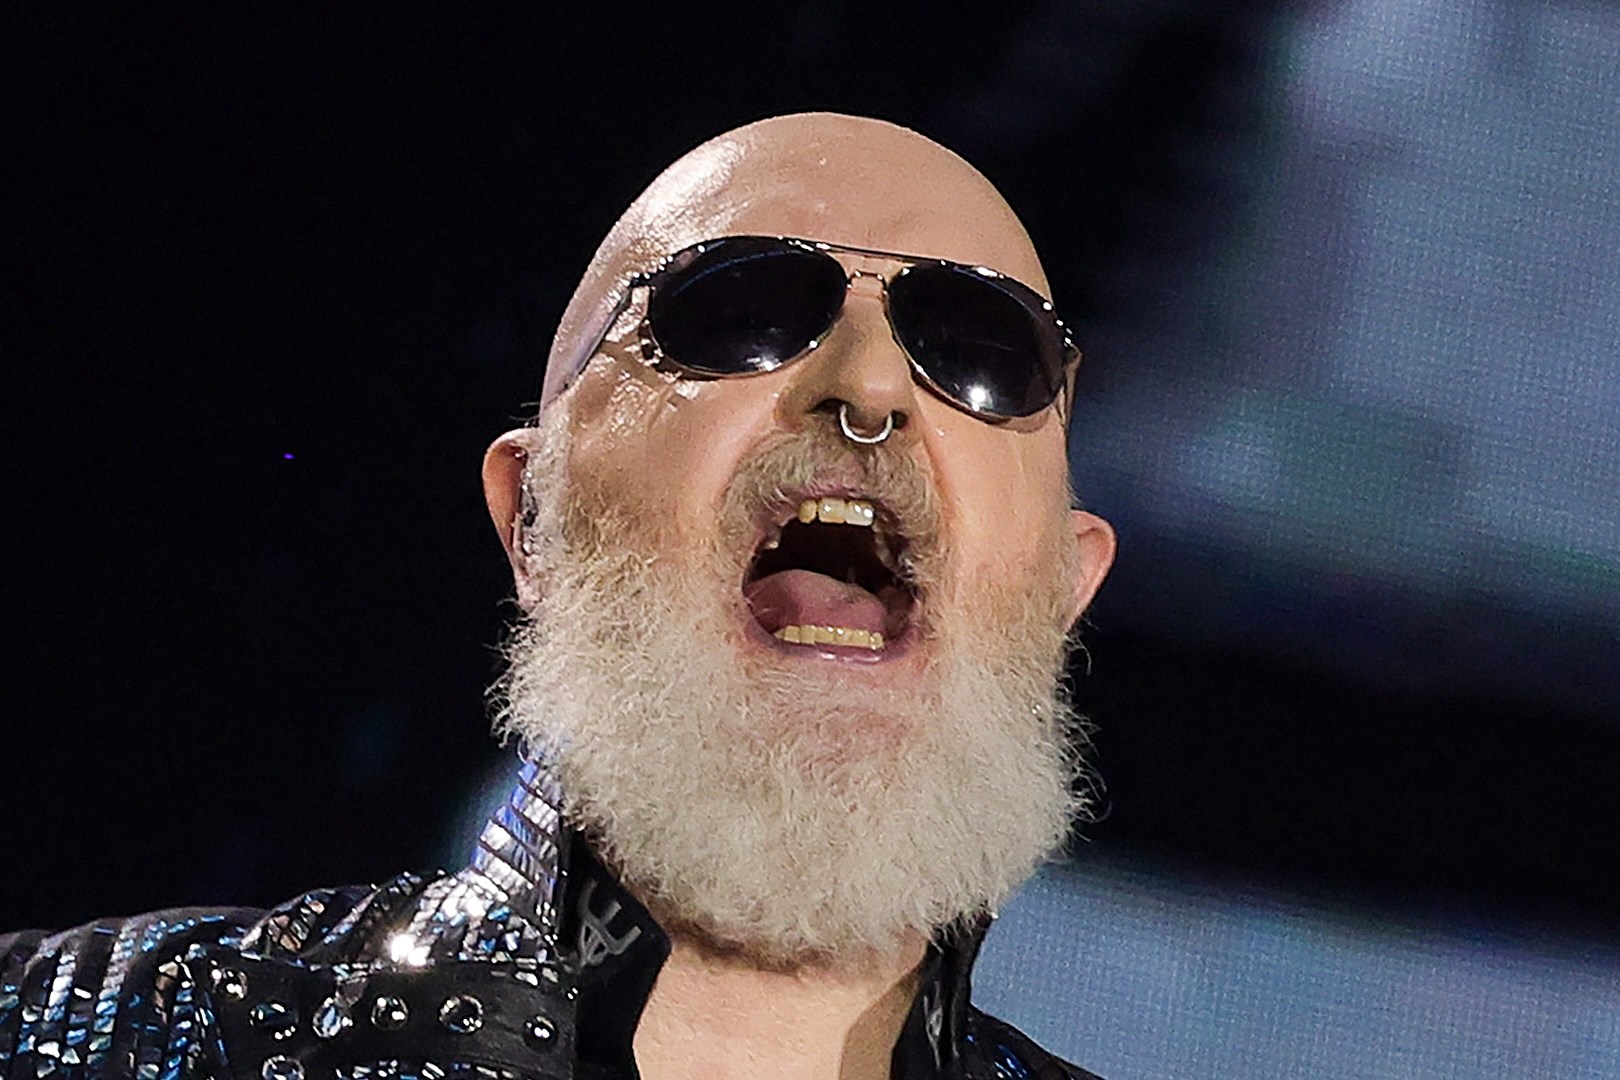 Rob Halford - Everything About Priest Immersed in New Album Title